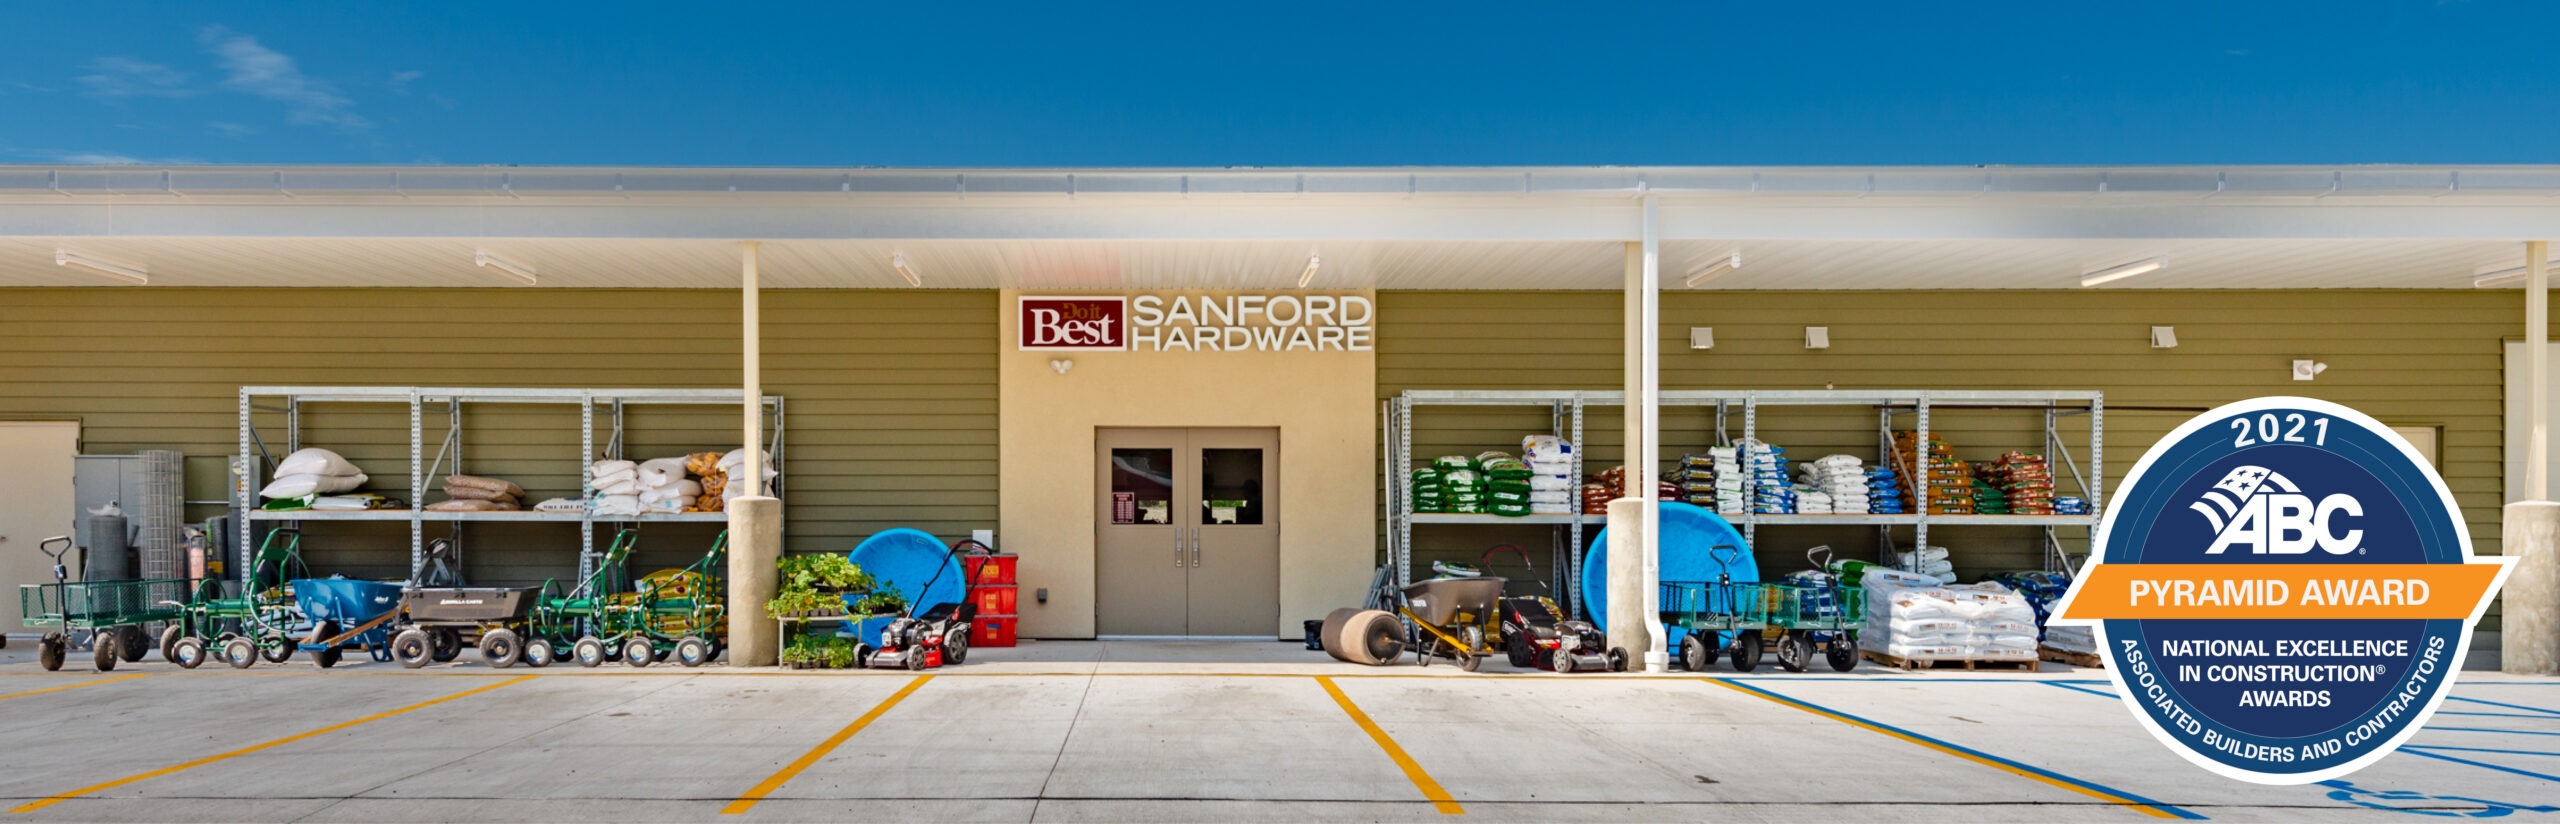 Sanford Hardware was recognized as an Associated Builders and Contractors 